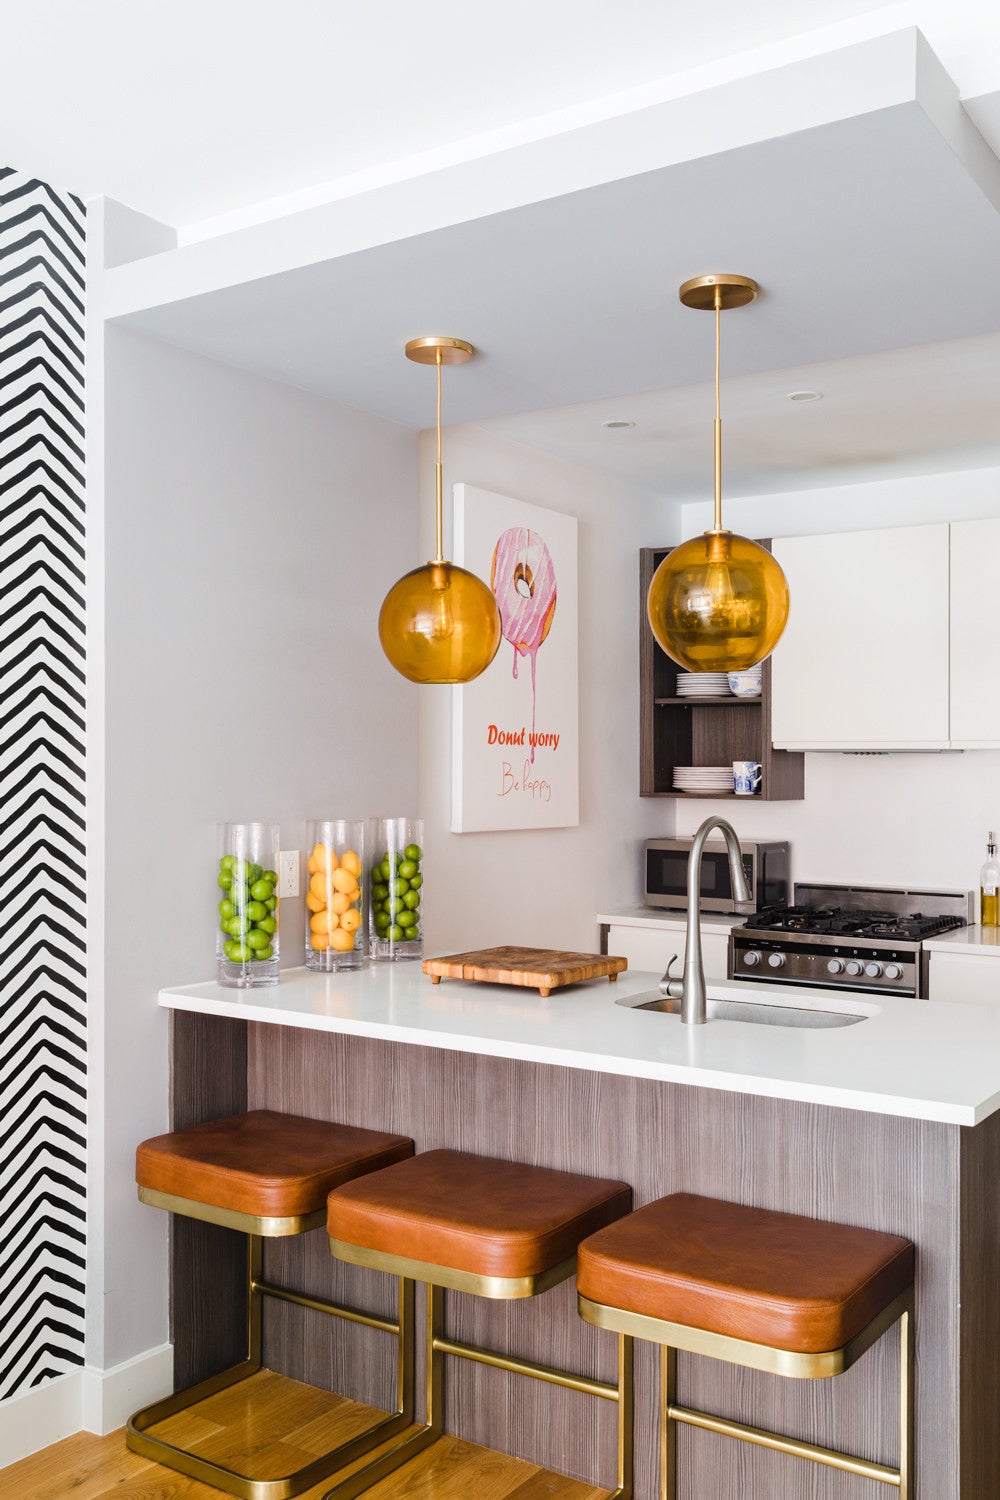 This Celebrity Chef’s Apartment Is as Bold as His Personality